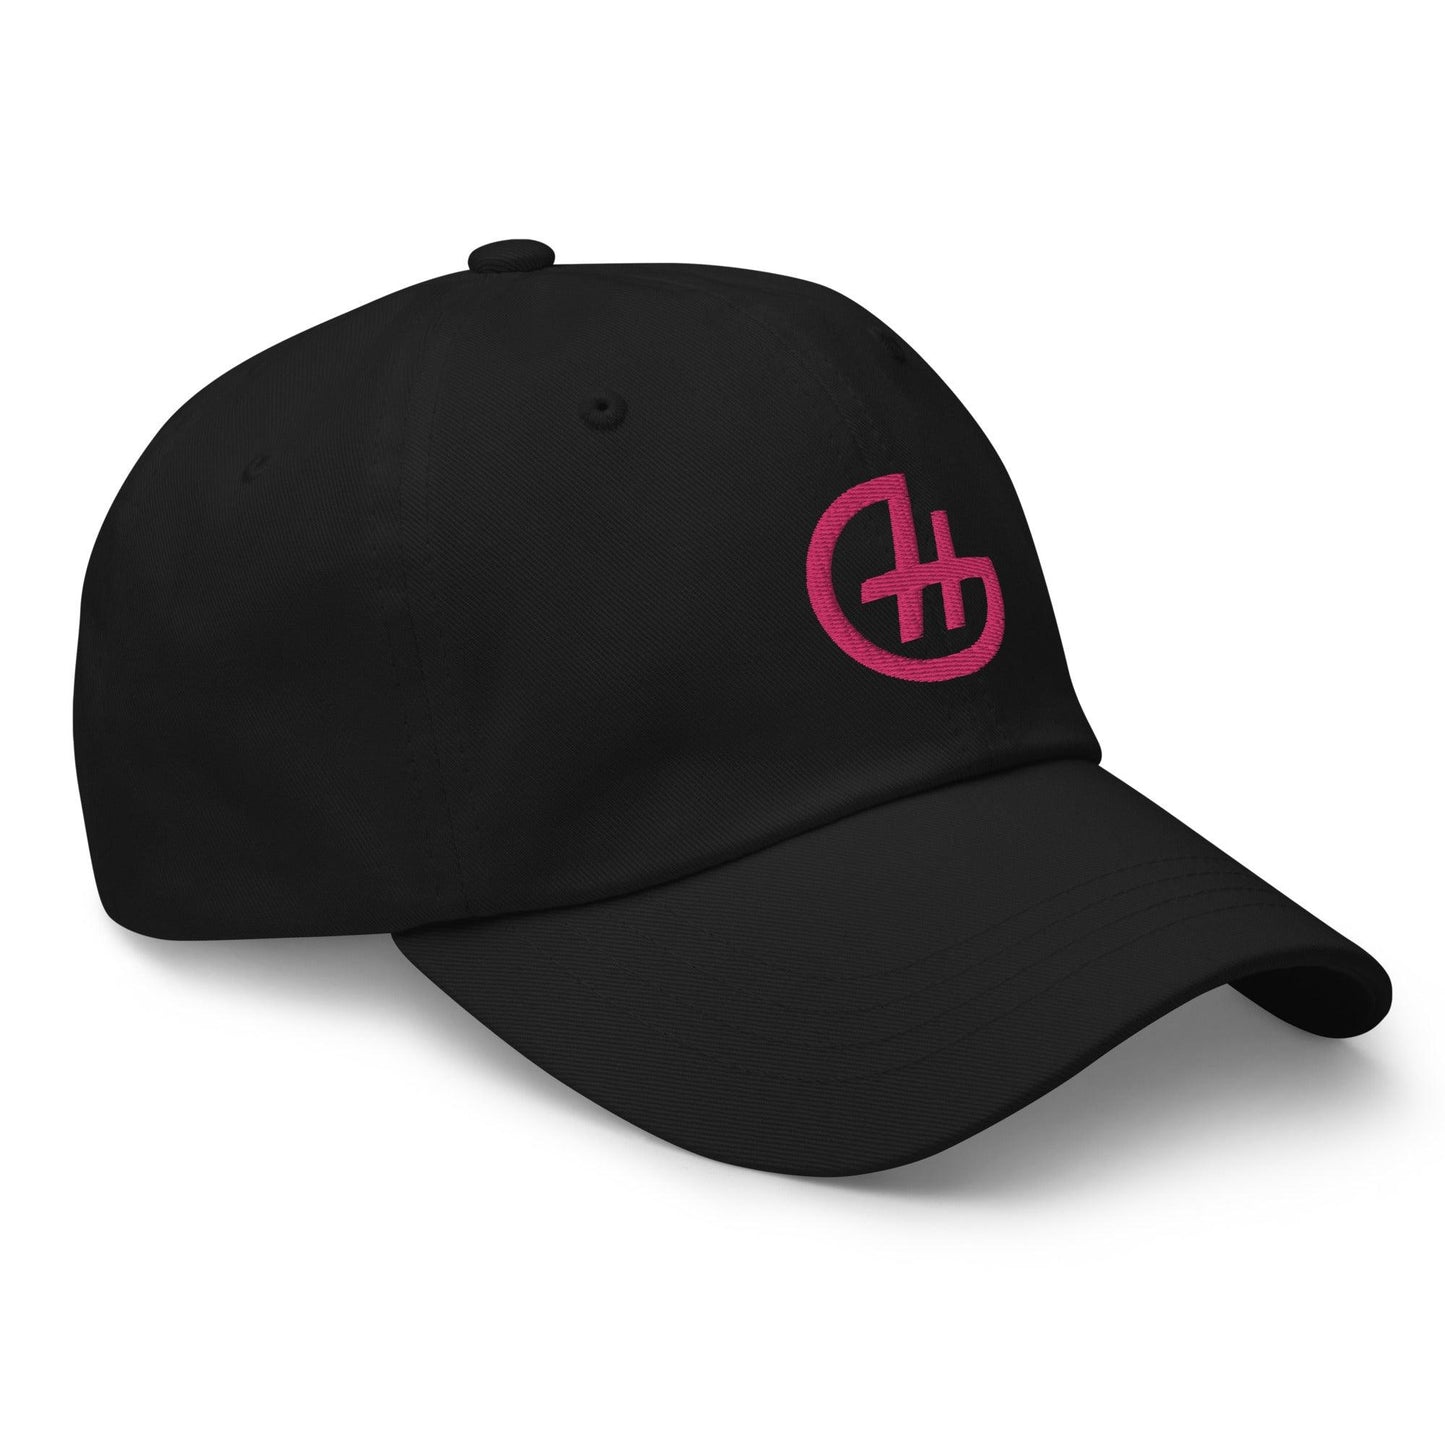 Hannah Gusters "The Brand" hat - Fan Arch